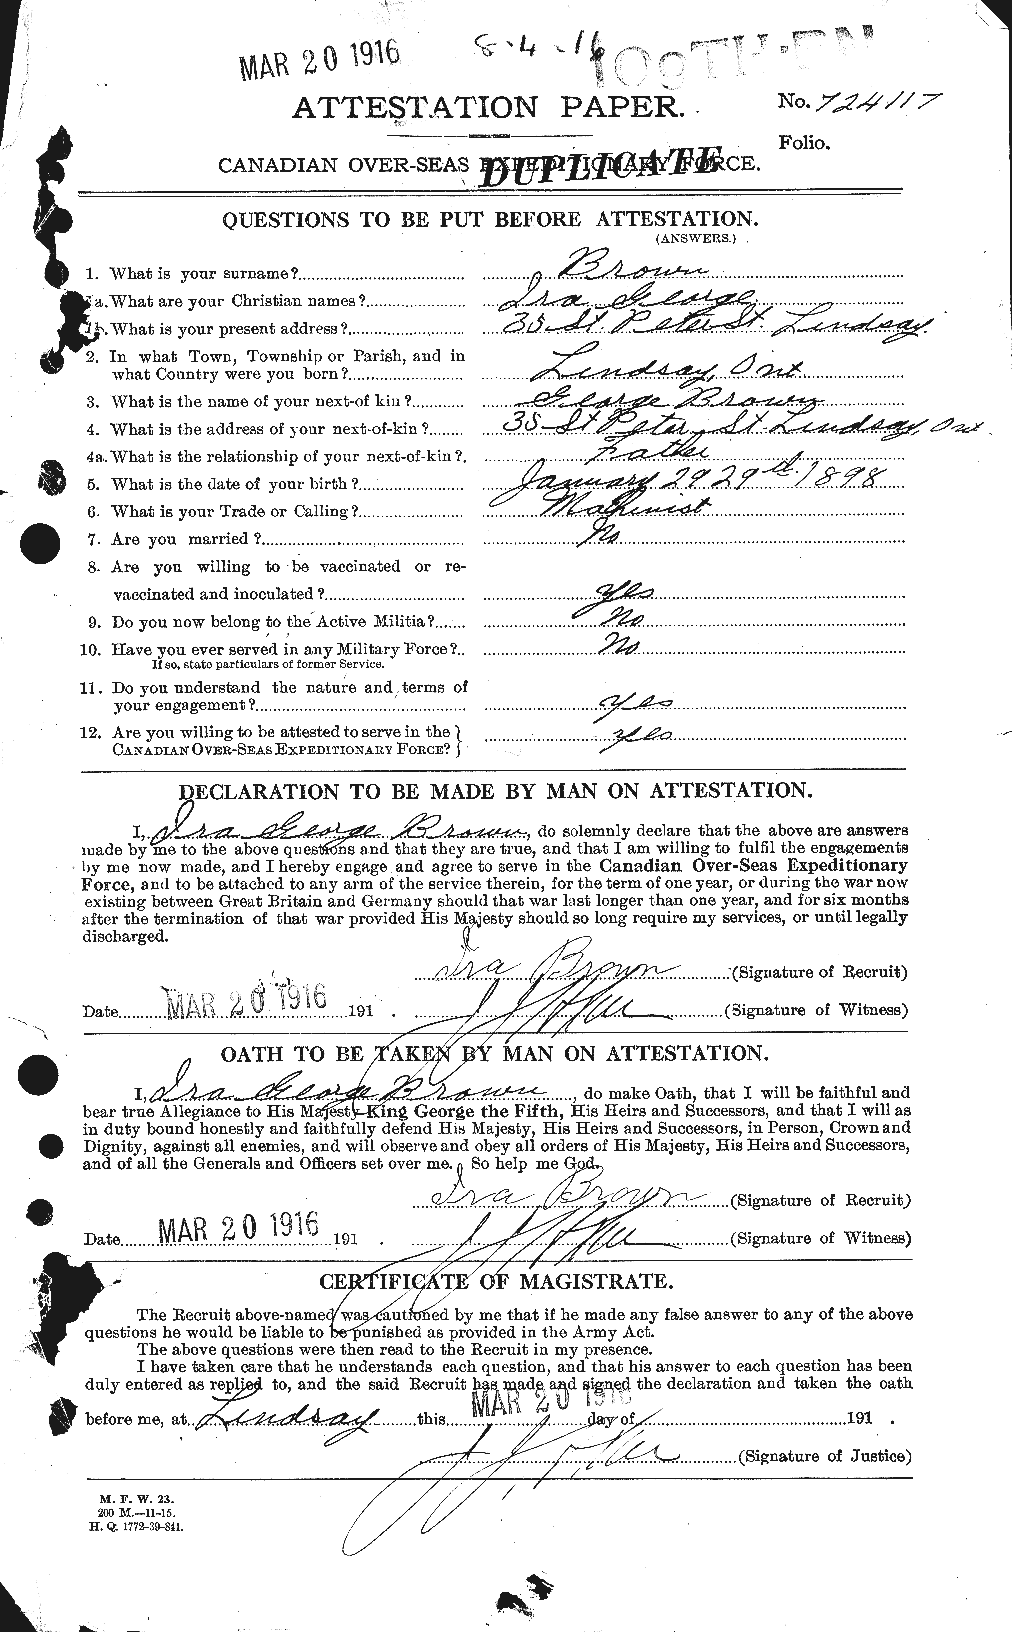 Personnel Records of the First World War - CEF 265657a